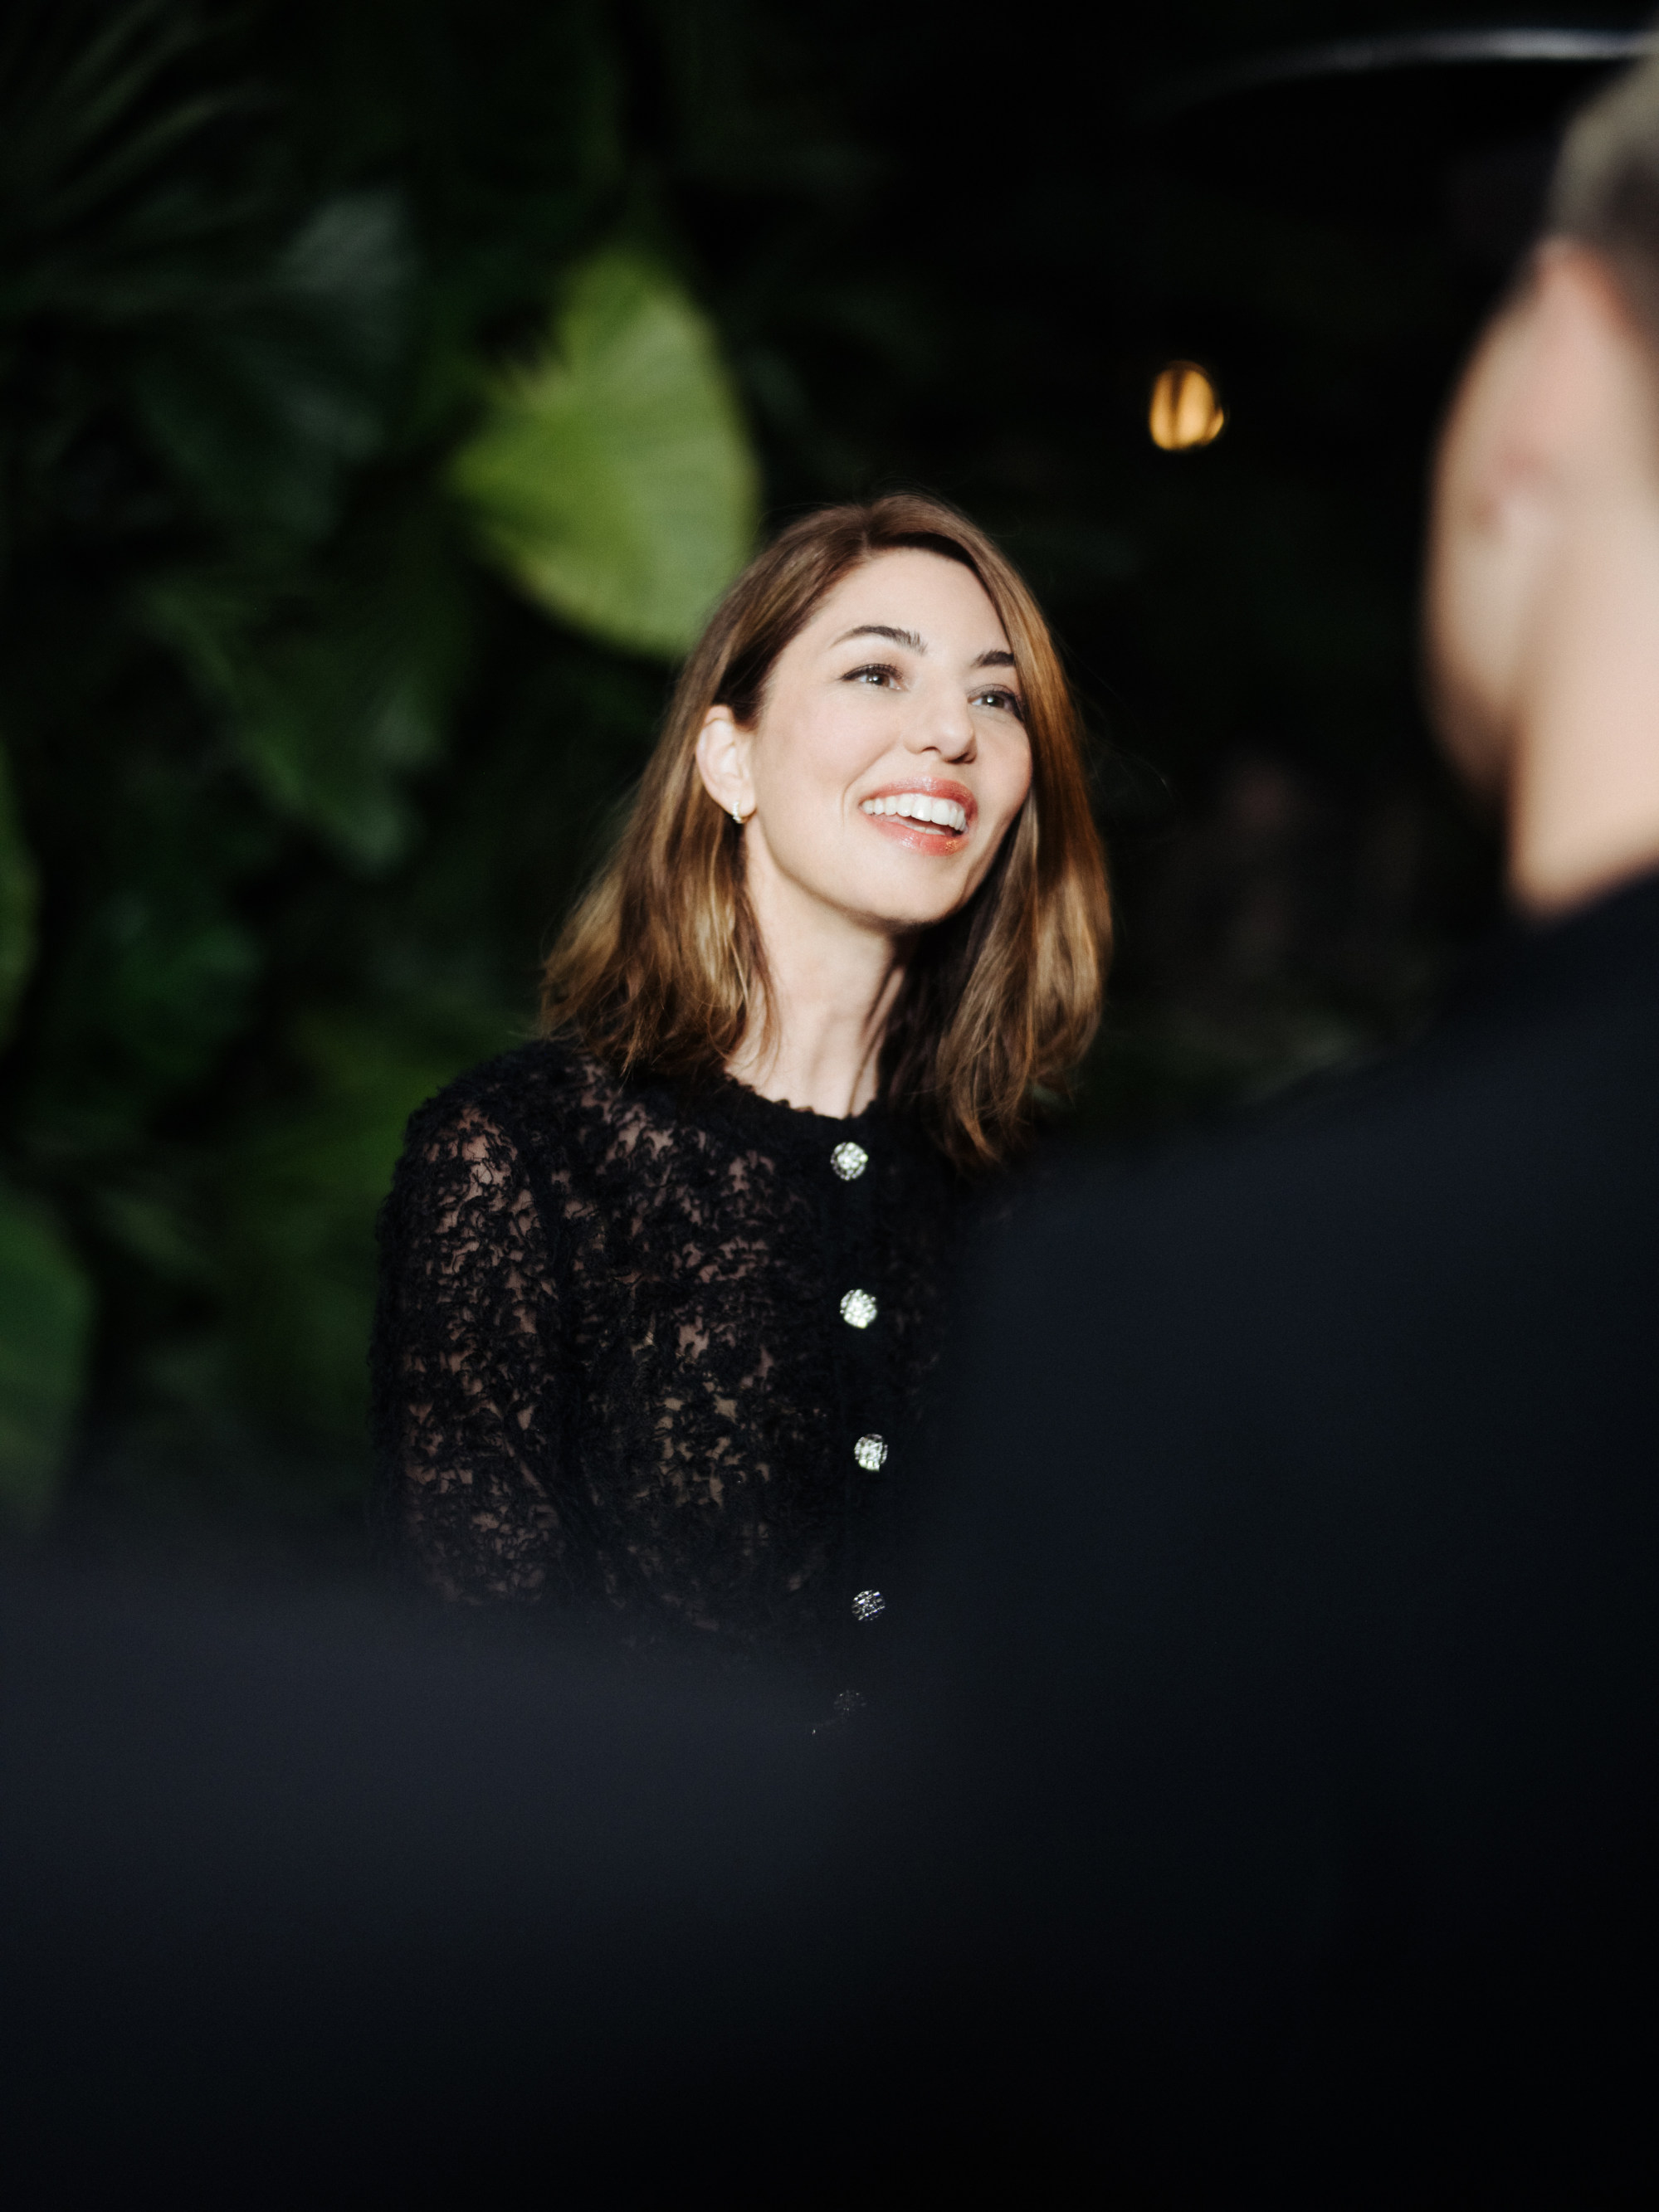 Sofia Coppola on 'fun' filming for Chanel, avoiding social media, saying no  to blockbusters, and how her love for fashion influences her work